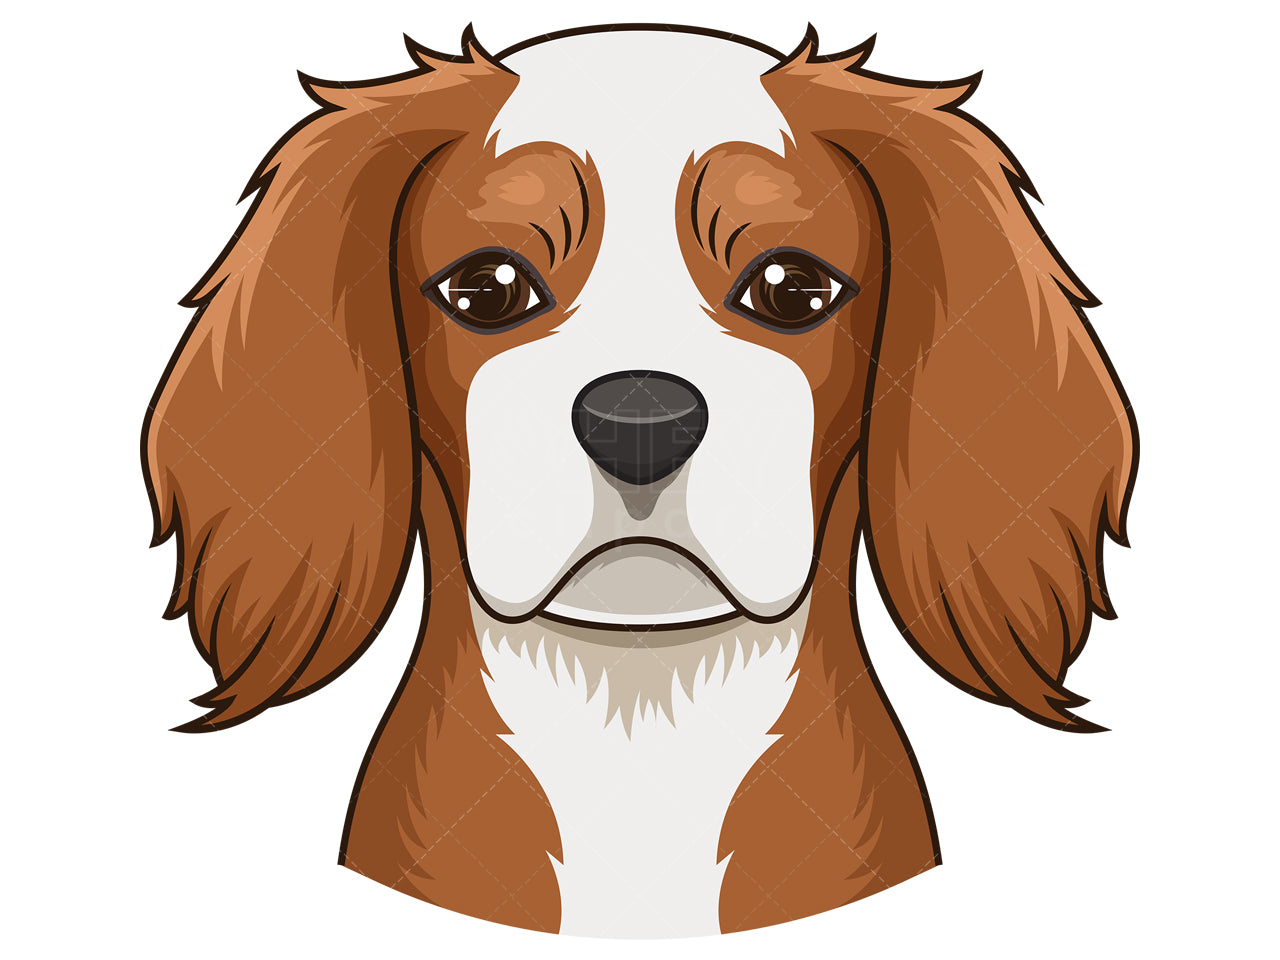 Royalty-free stock vector illustration of a cavalier king charles spaniel face.